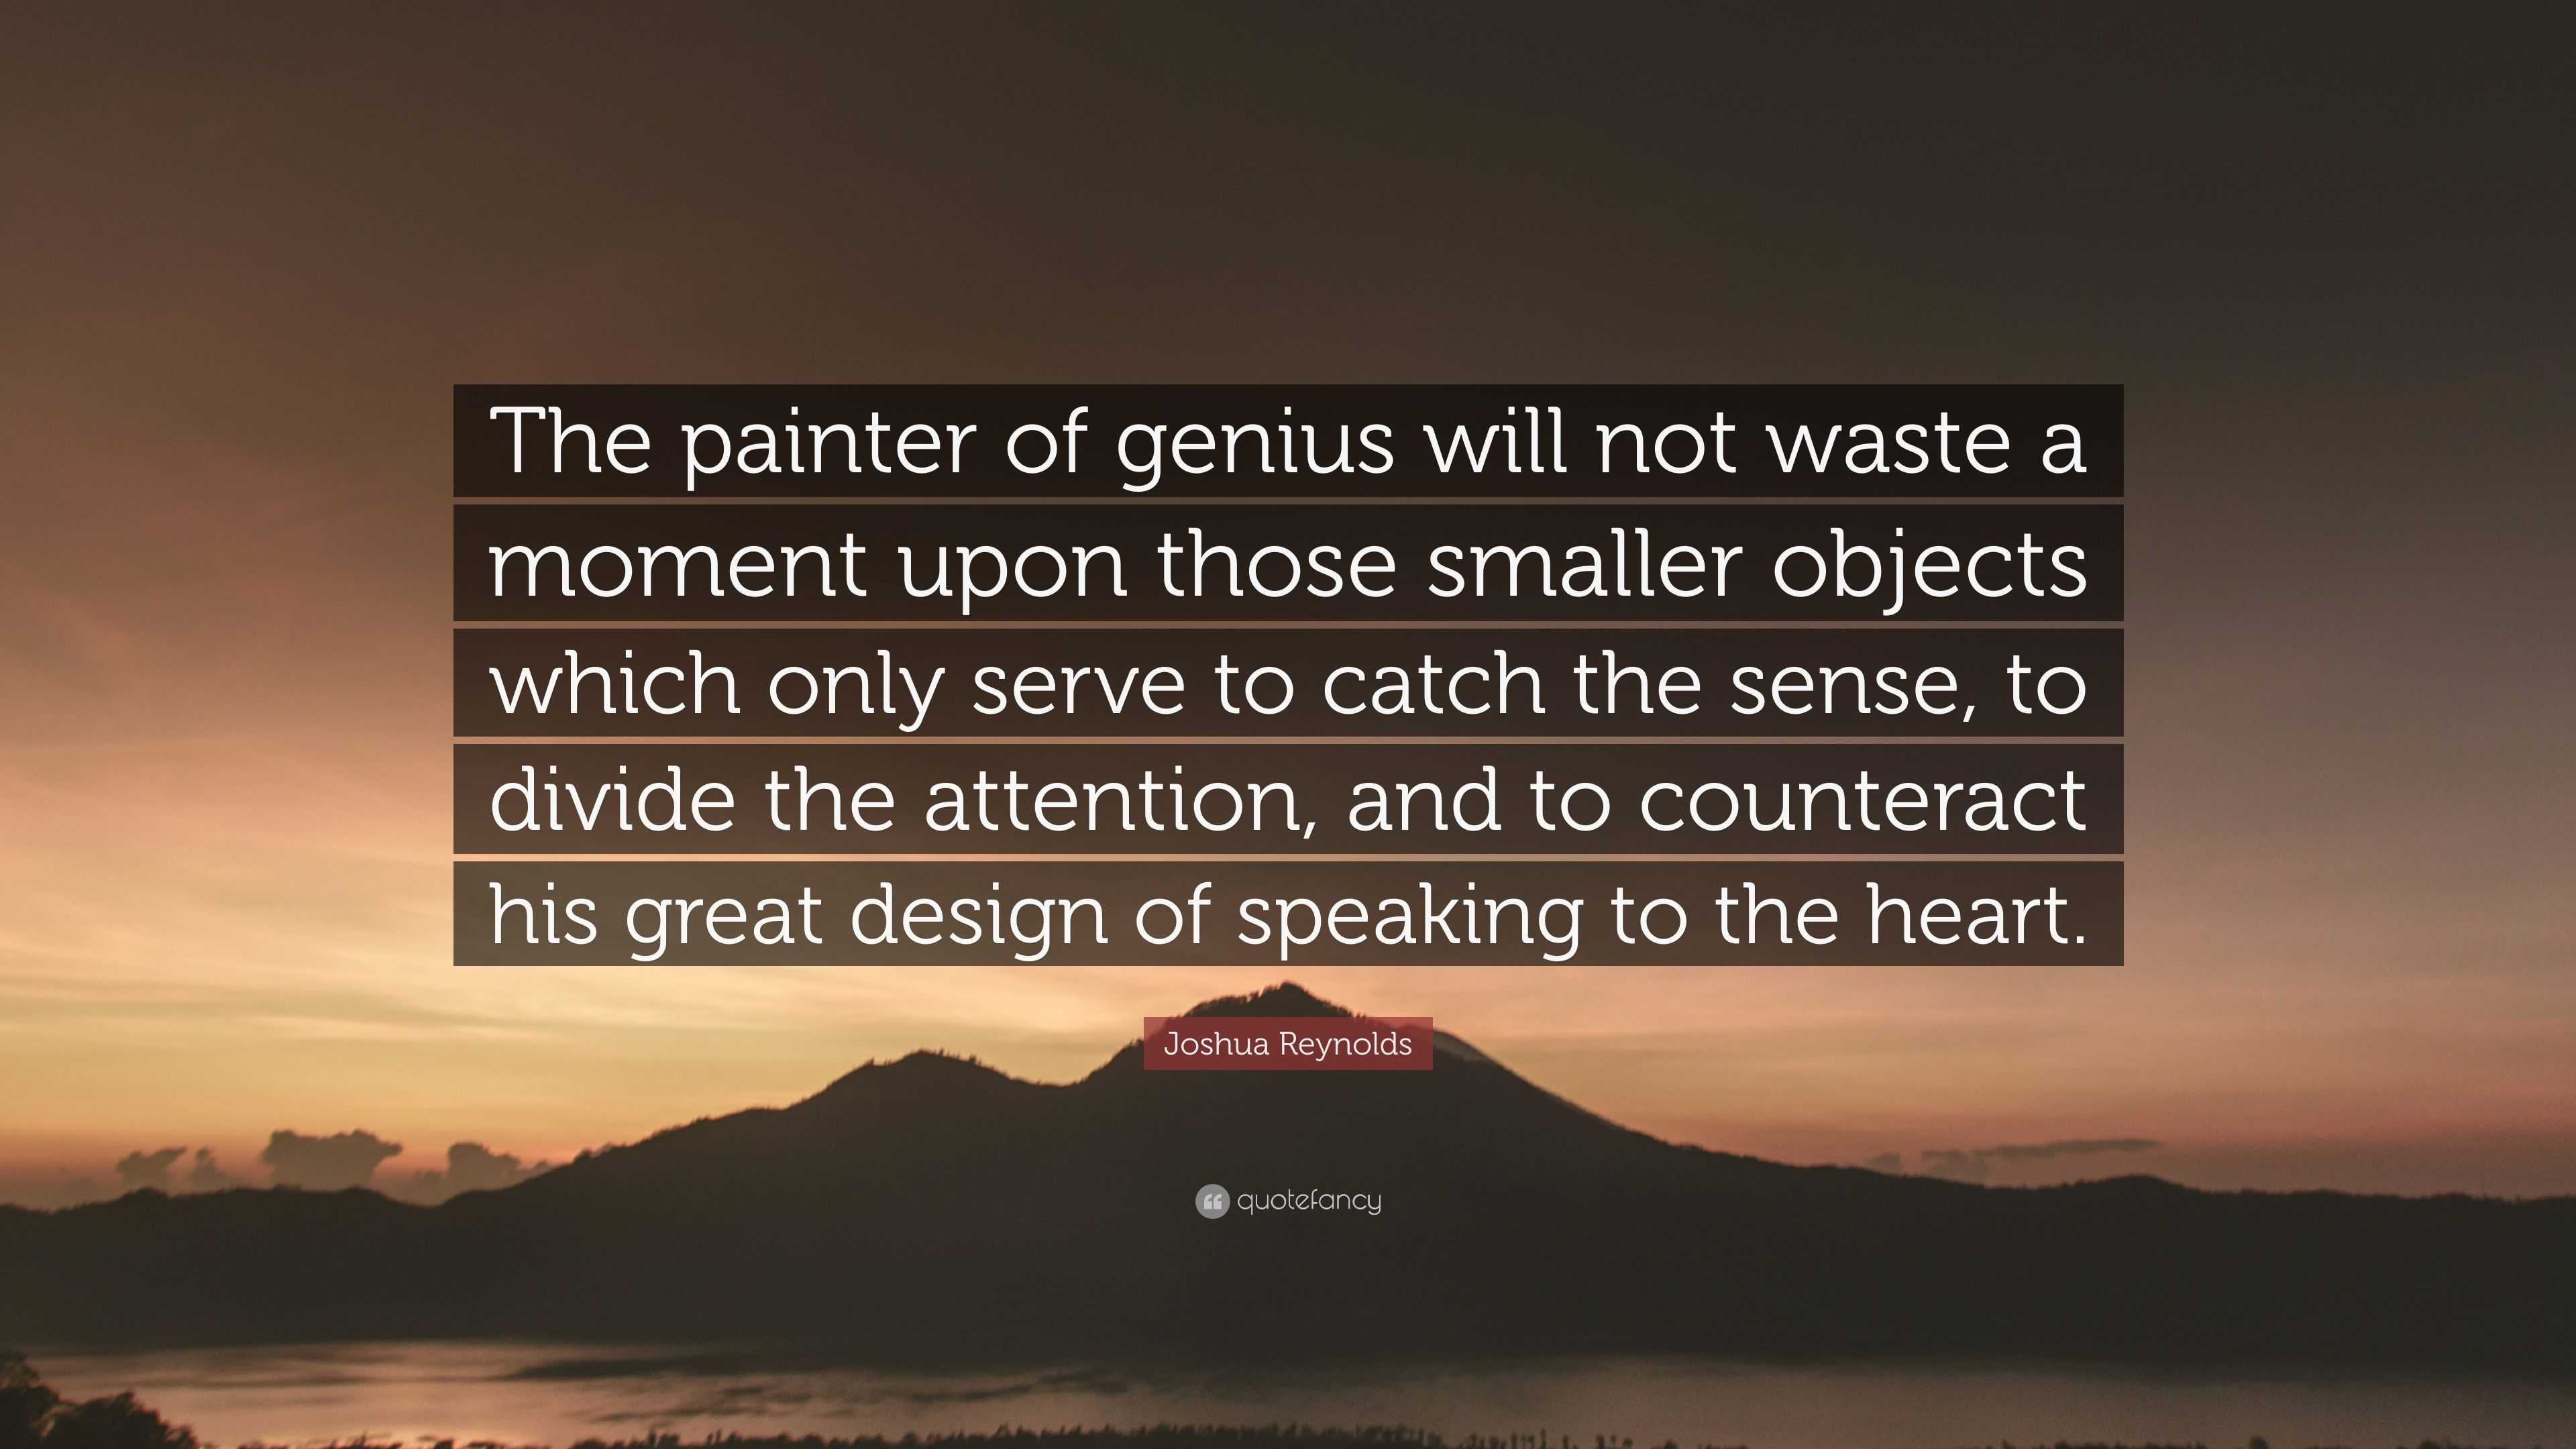 Joshua Reynolds Quote The Painter Of Genius Will Not Waste A Moment Upon Those Smaller Objects Which Only Serve To Catch The Sense To Divide 7 Wallpapers Quotefancy